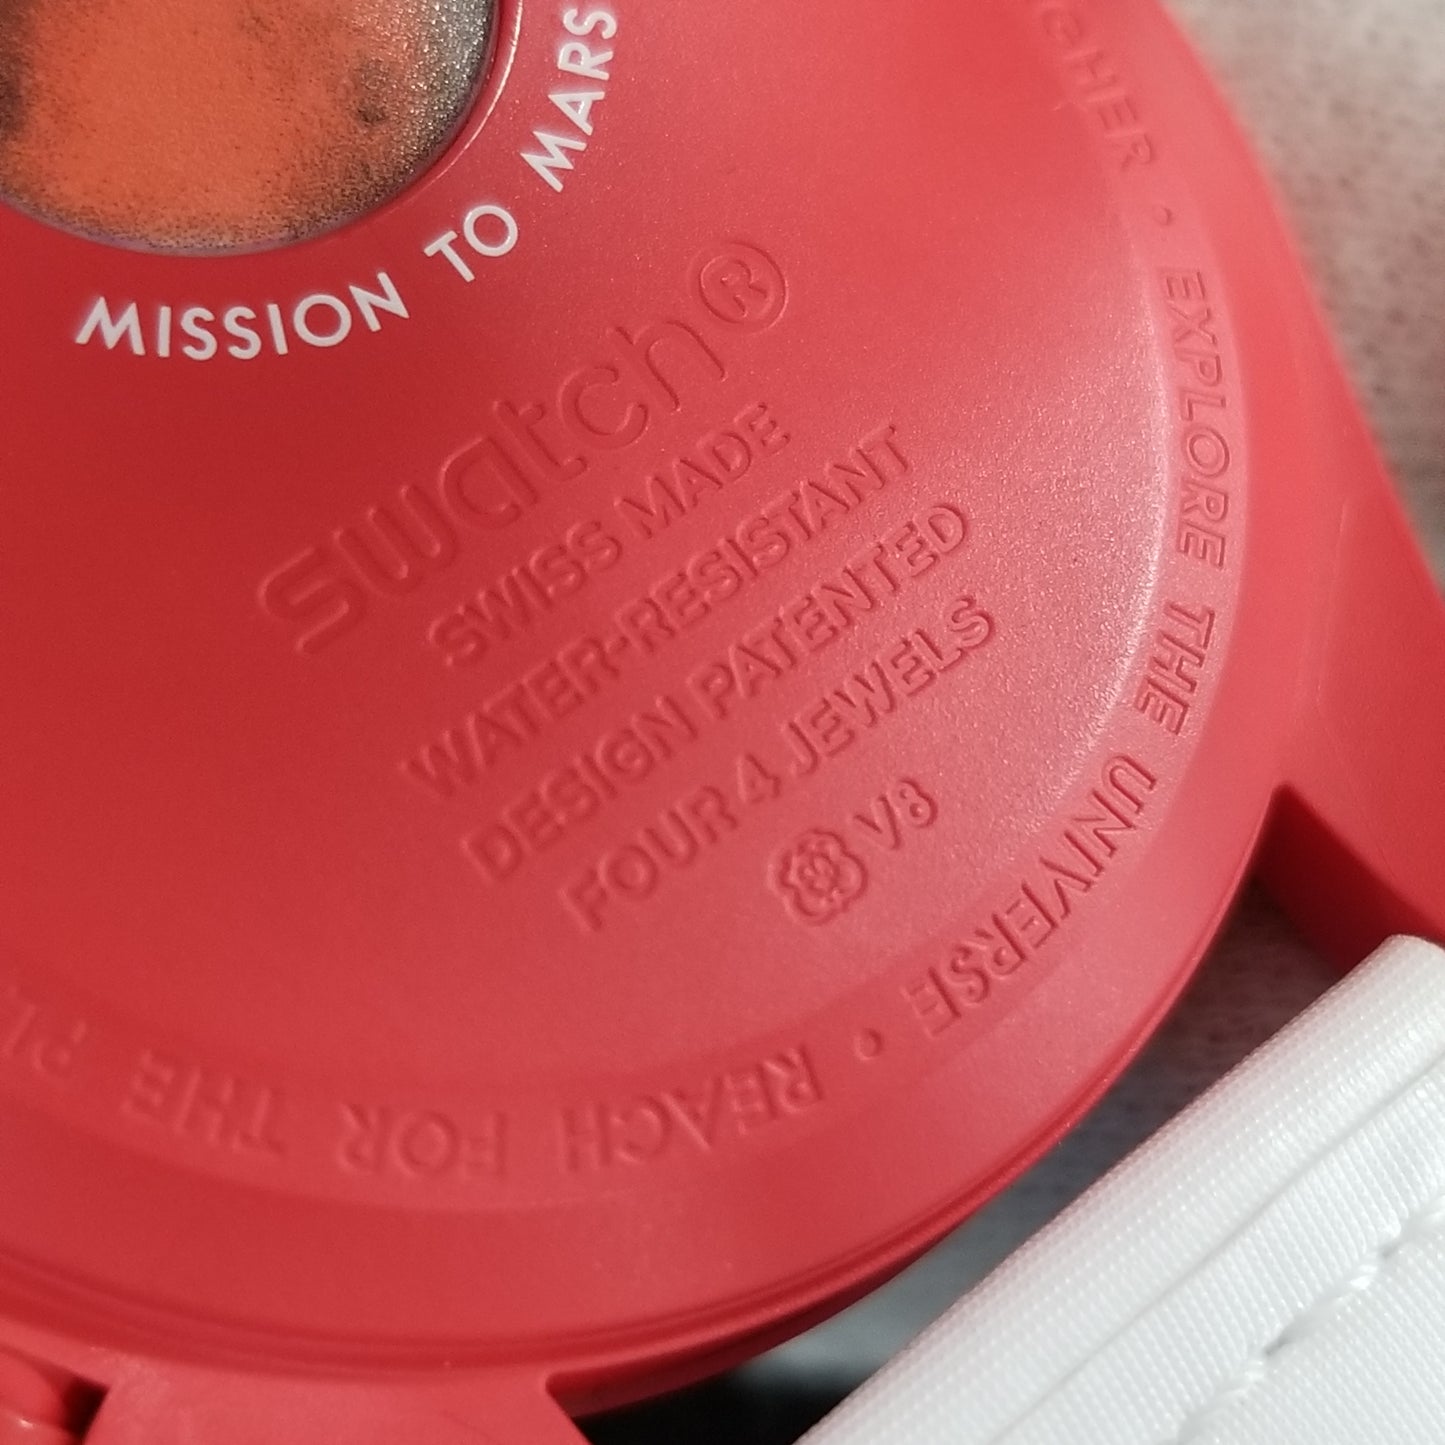 SO33R100 OMEGA×SWATCH MISSION TO THE SUN 2SWT33-00005